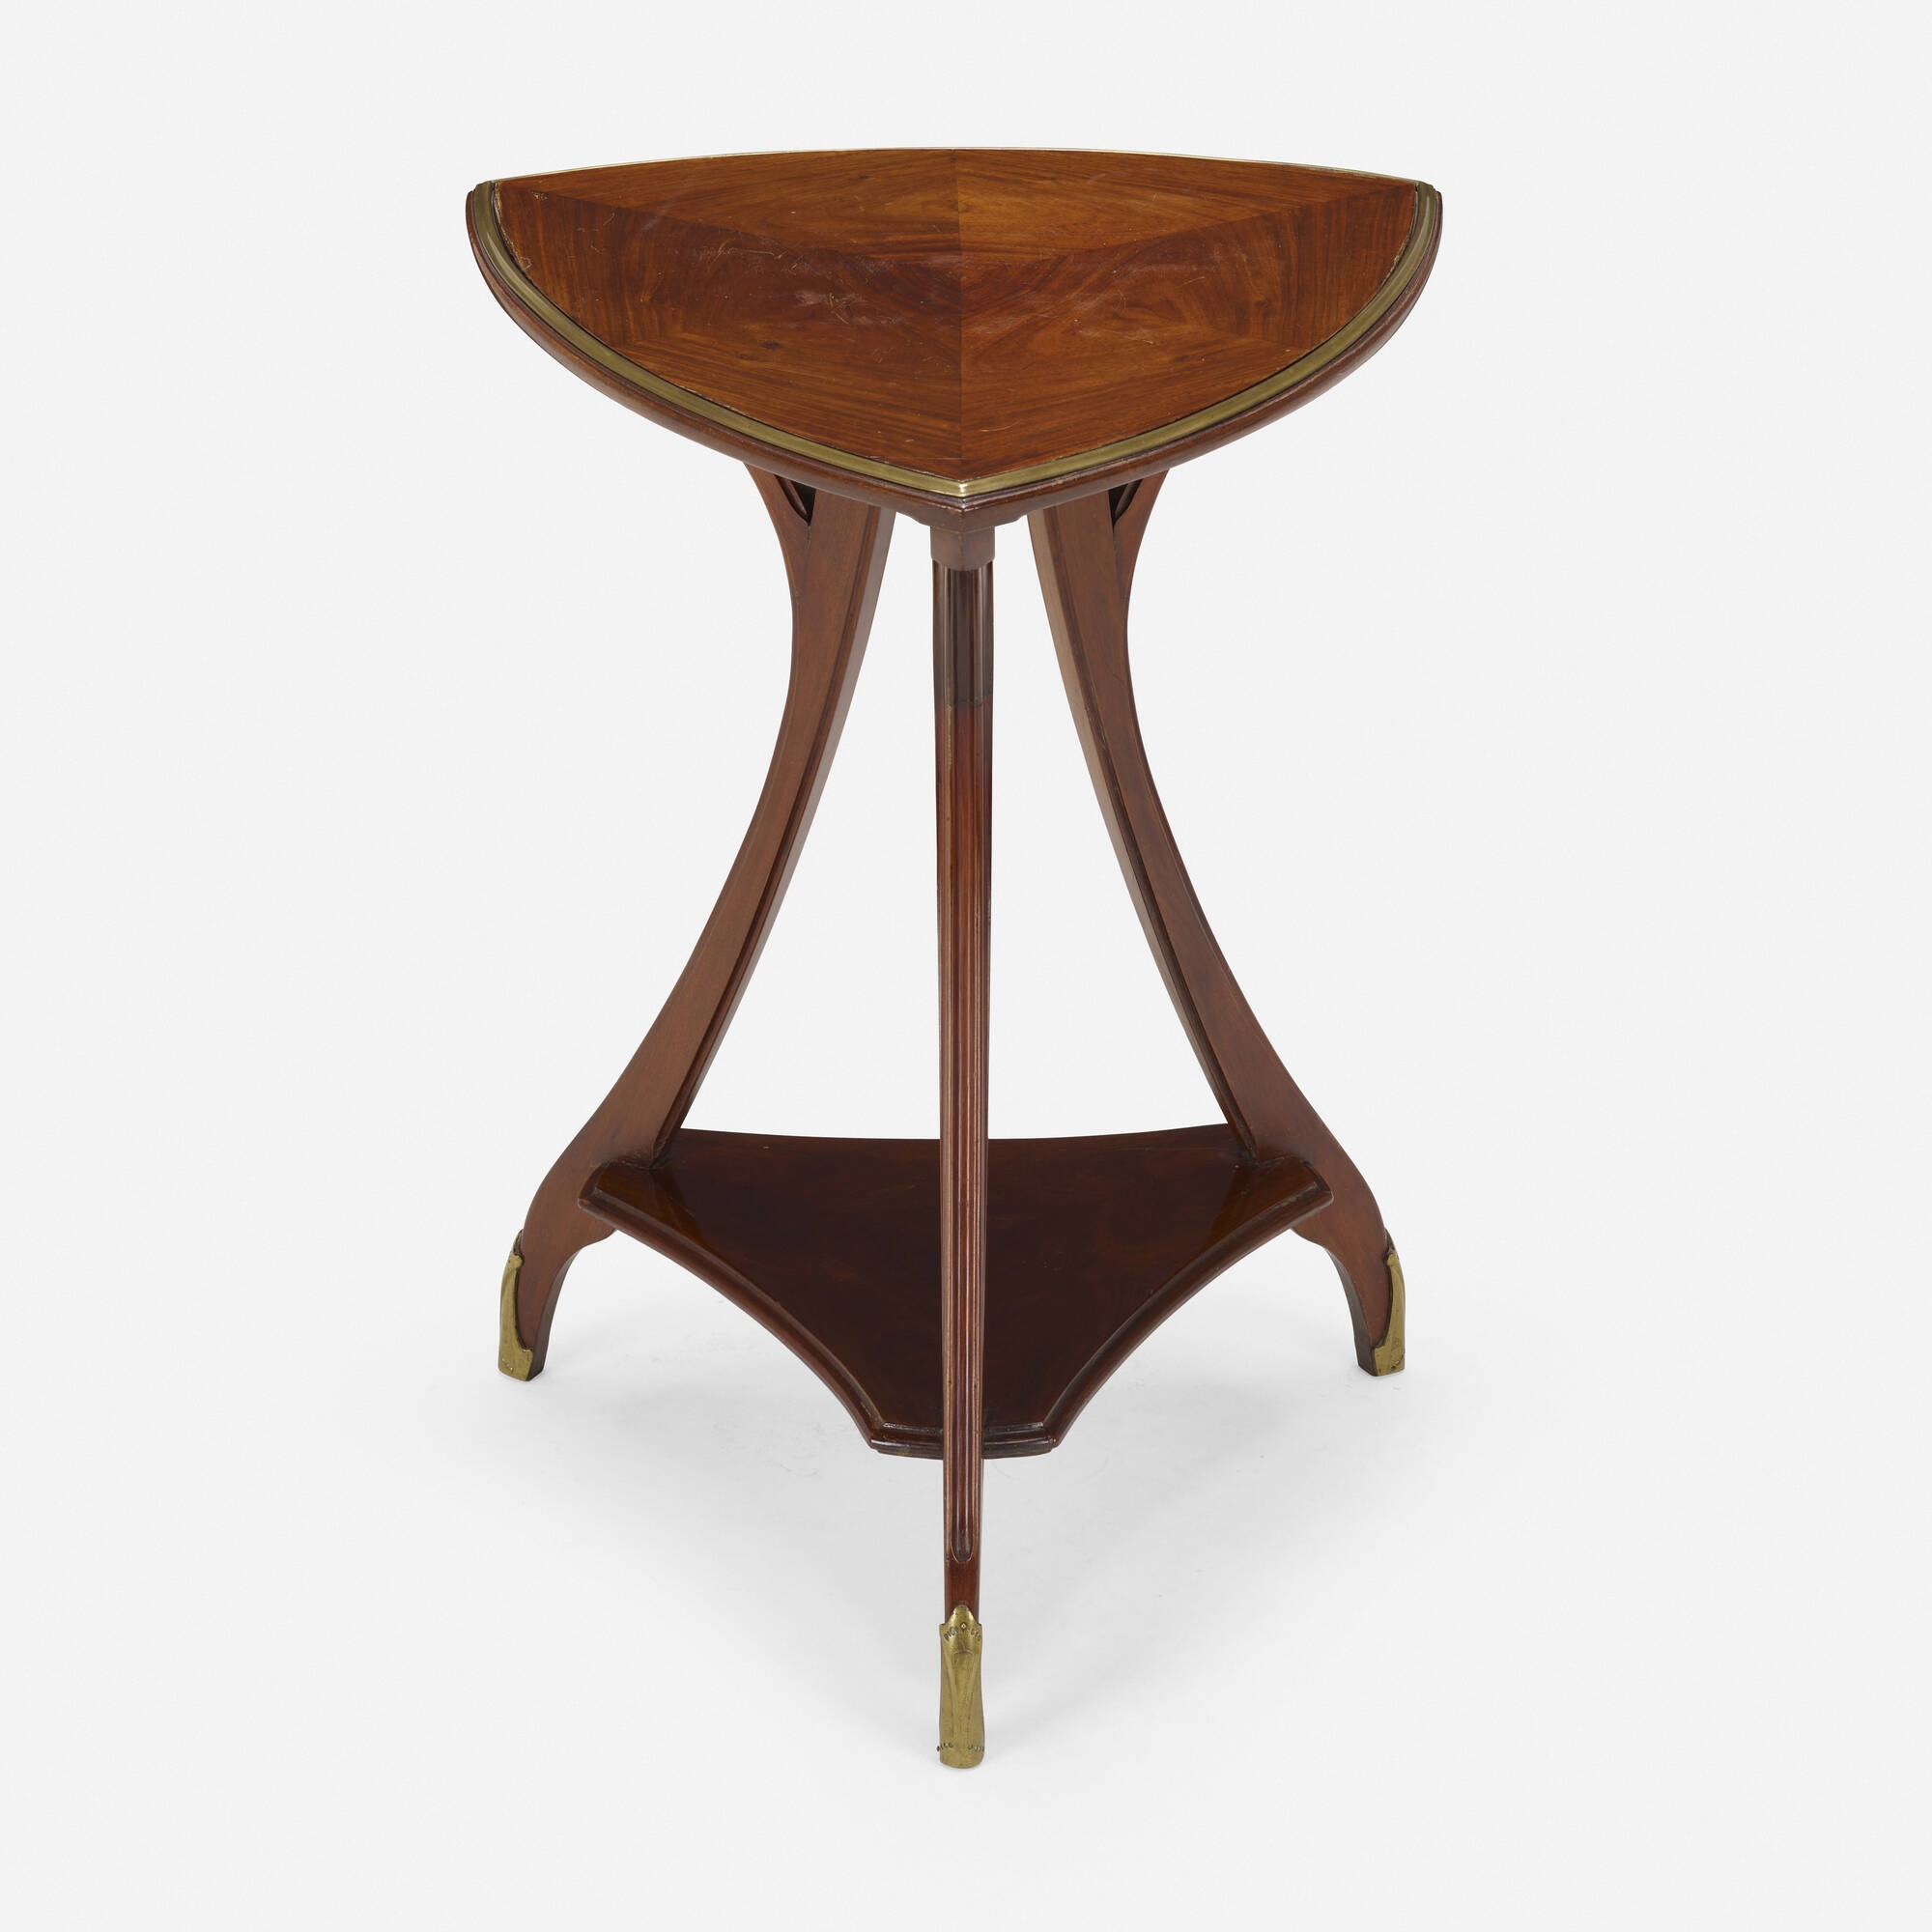 Occasional table by Louis Majorelle, circa 1900